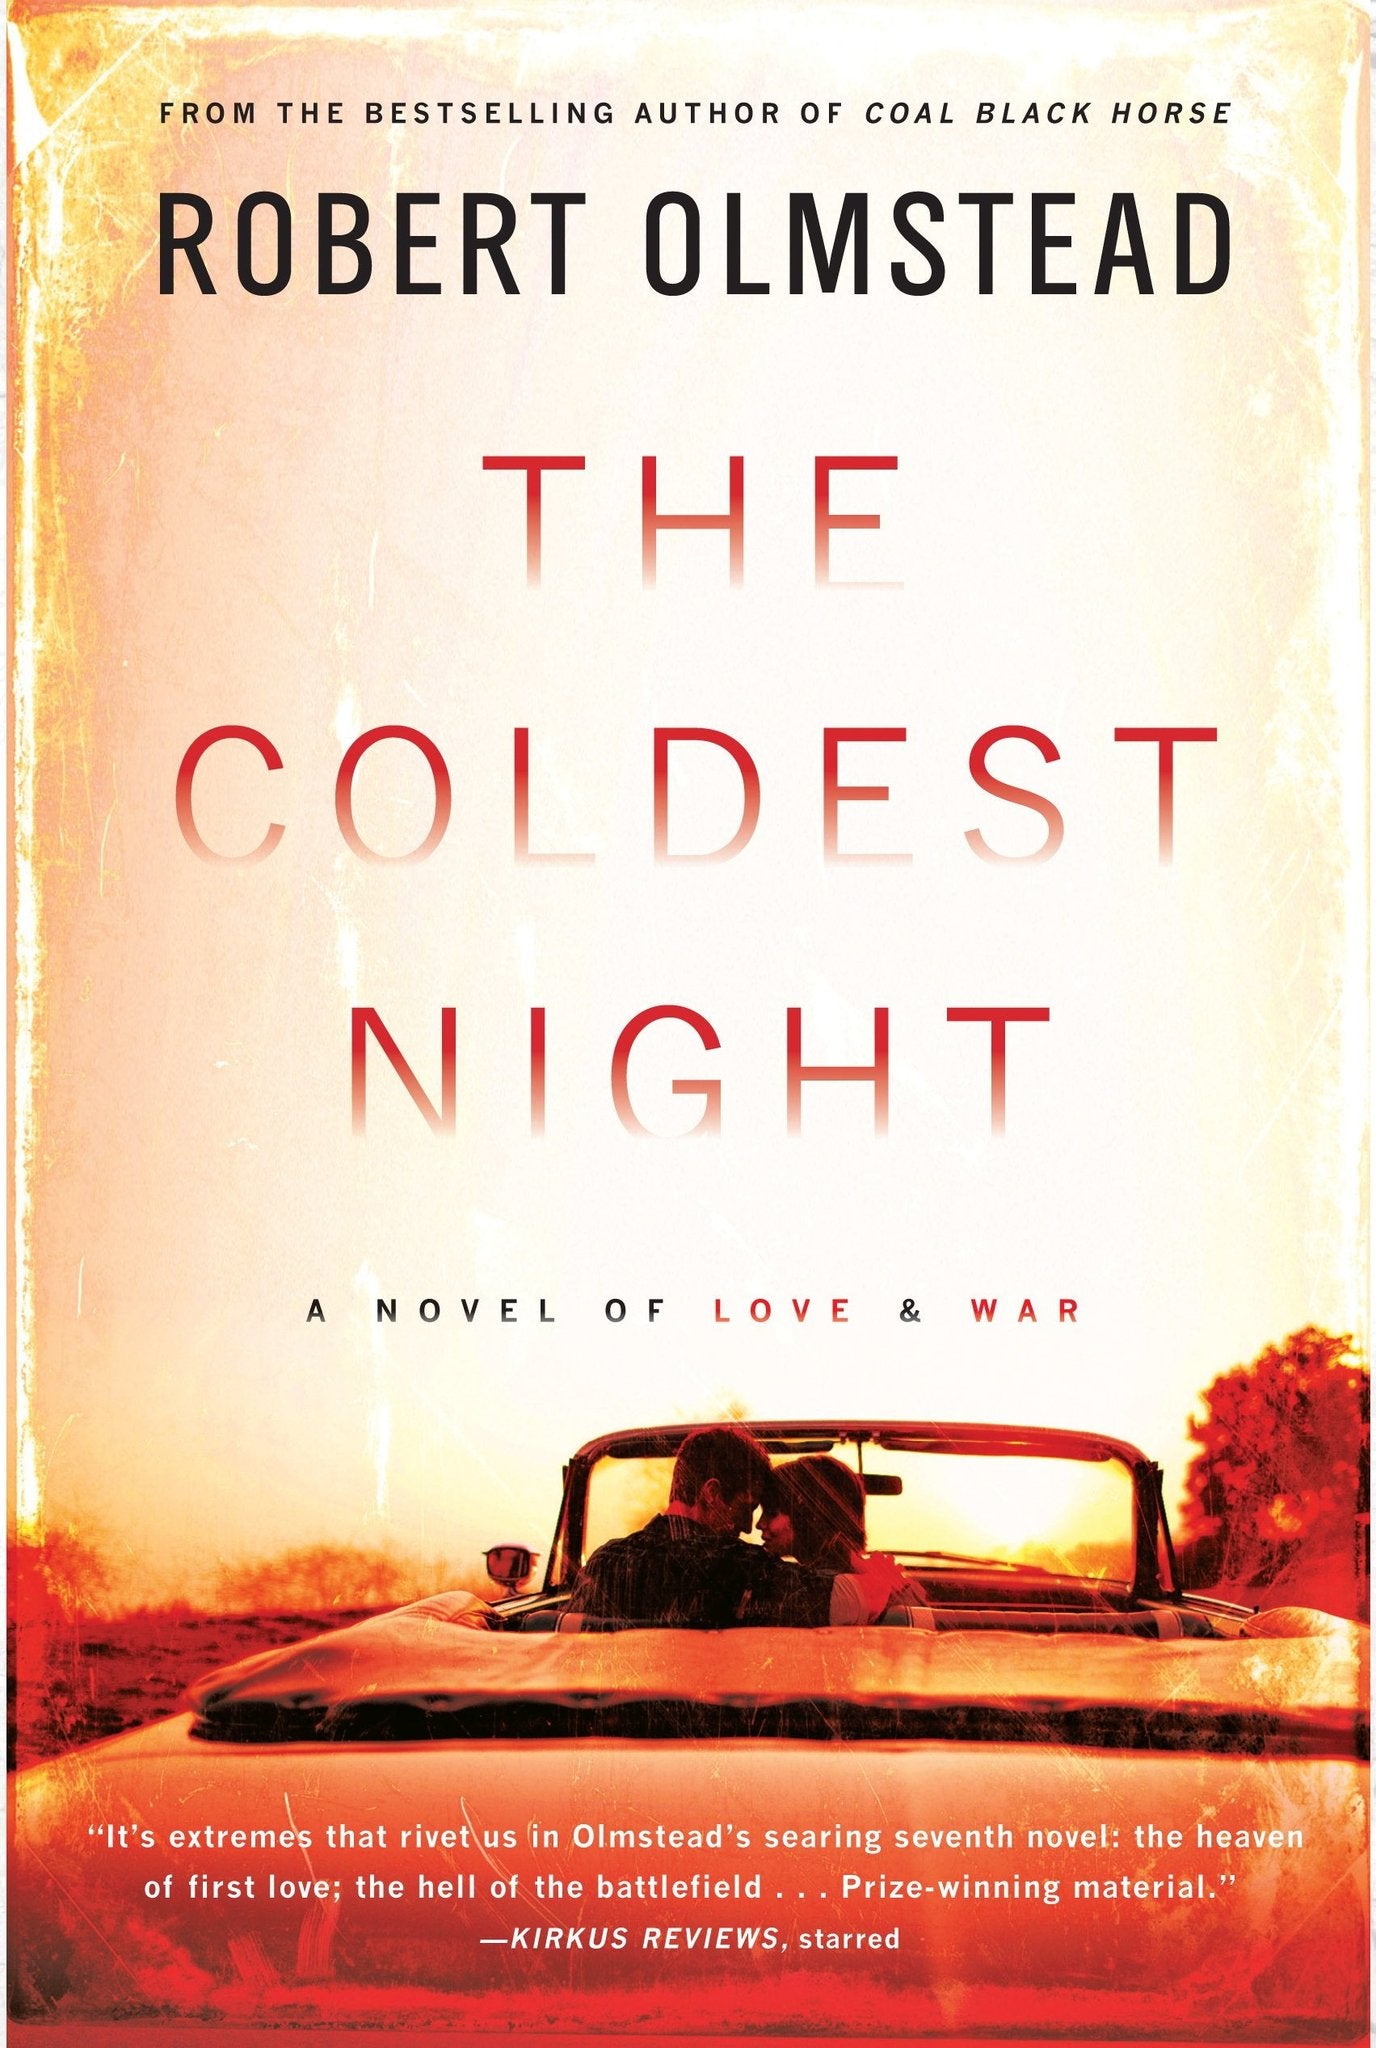 The Coldest Night by Robert Olmstead